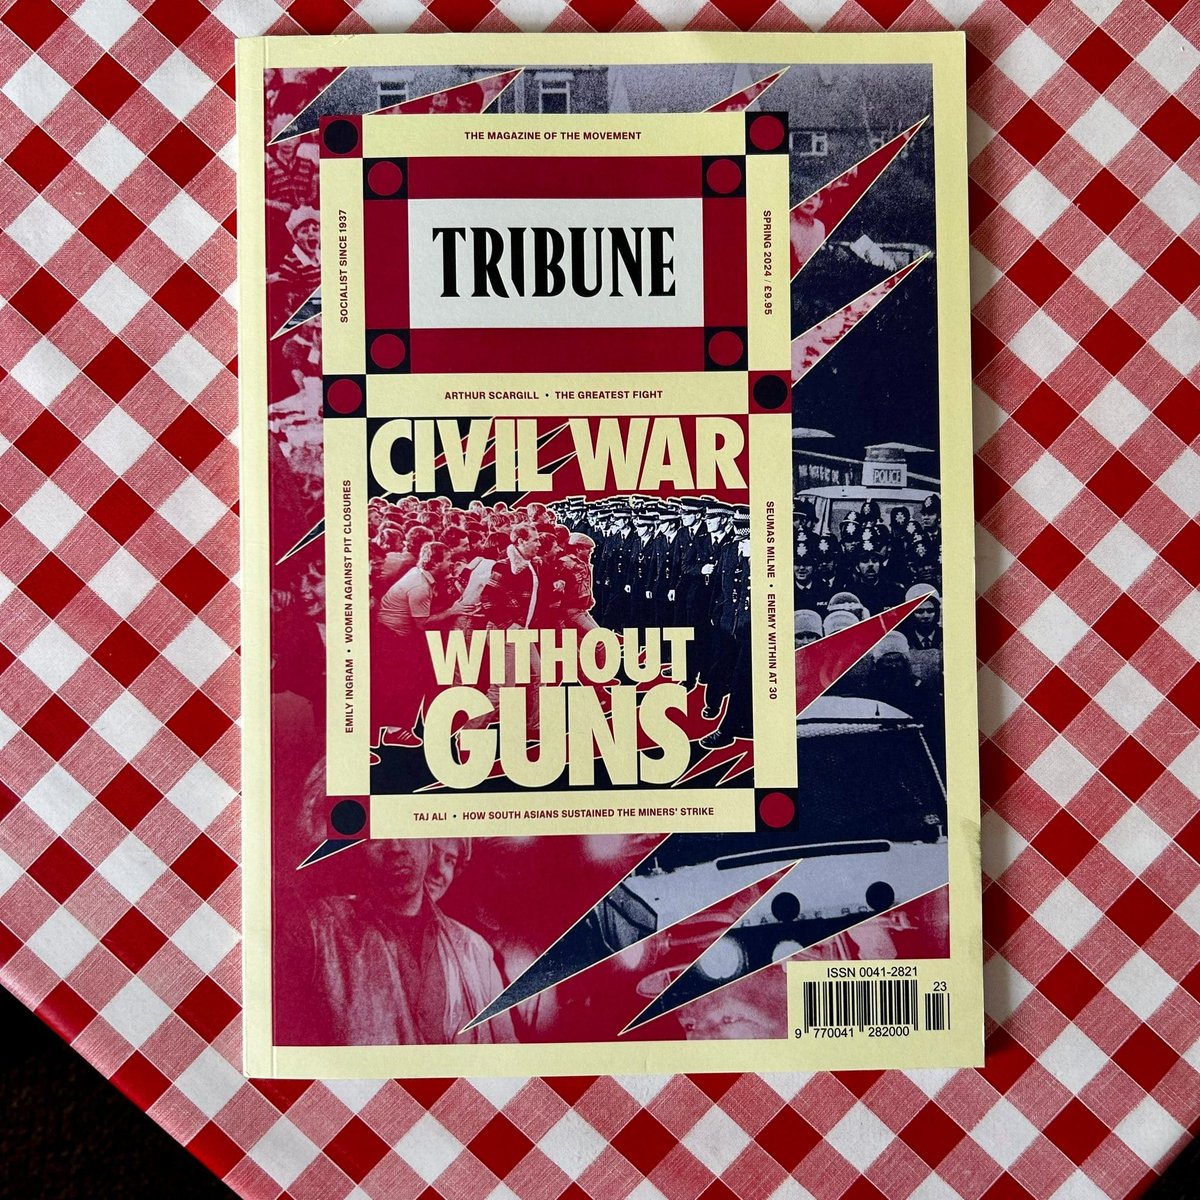 Our latest issue, ‘Civil War Without Guns,’ is out now. Arthur Scargill, Seumas Milne, David Peace and more explore the social fabric that fought and sustained the miners’ strike, what we lost in defeat, and how we rebuild. Subscribe here: tribunemag.co.uk/subscribe/?cod…